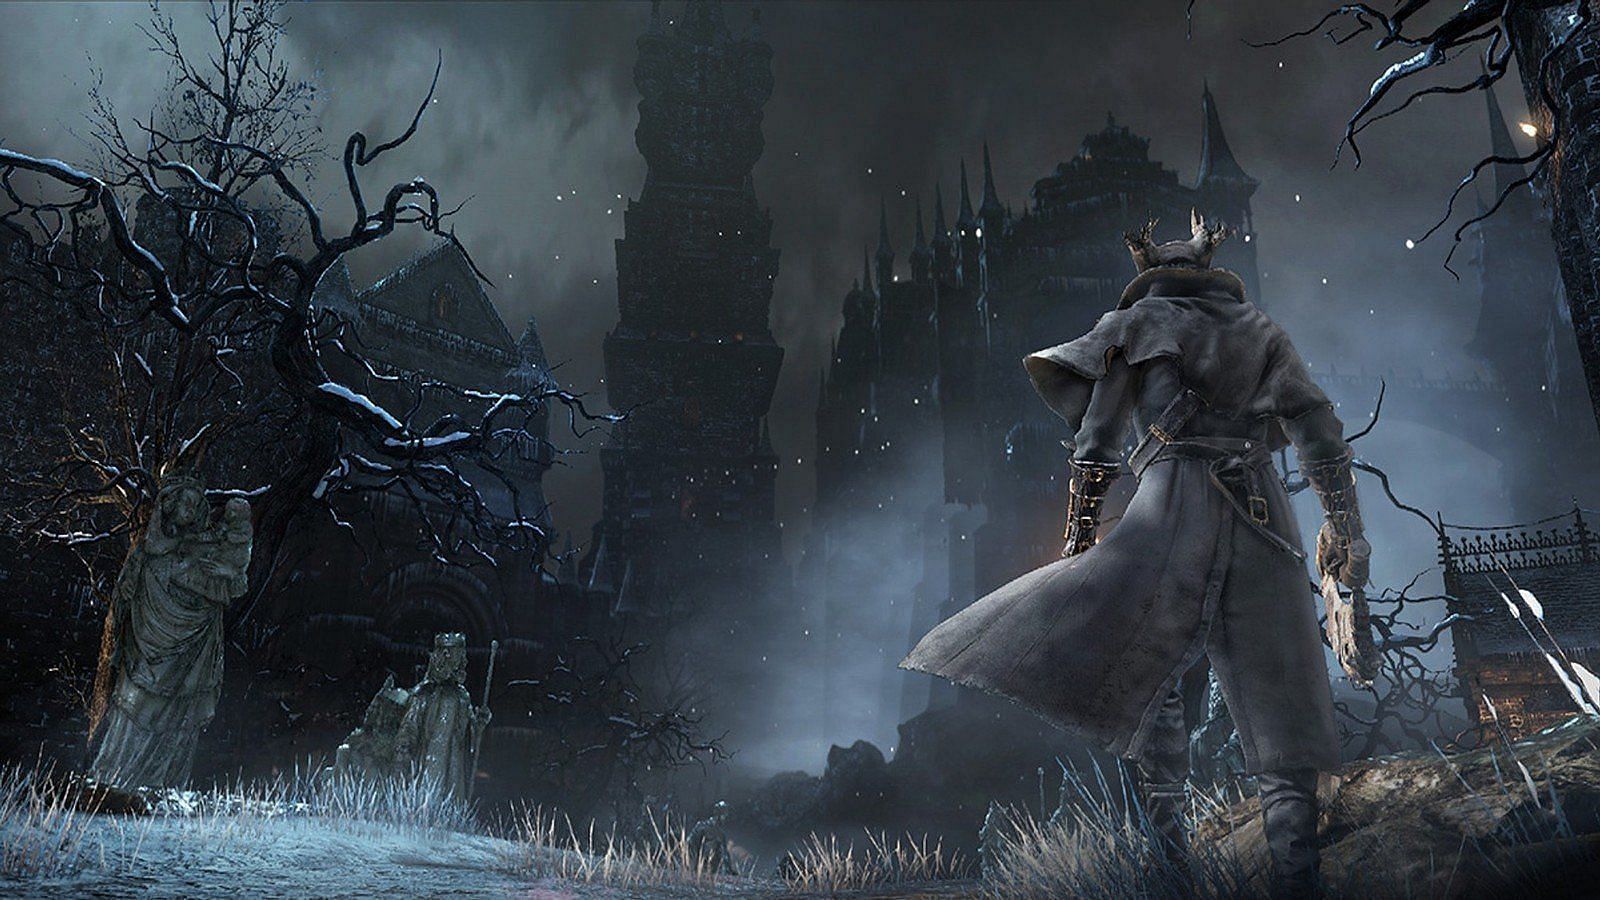 Bloodborne could possibly come to PC (Image via YouTube)